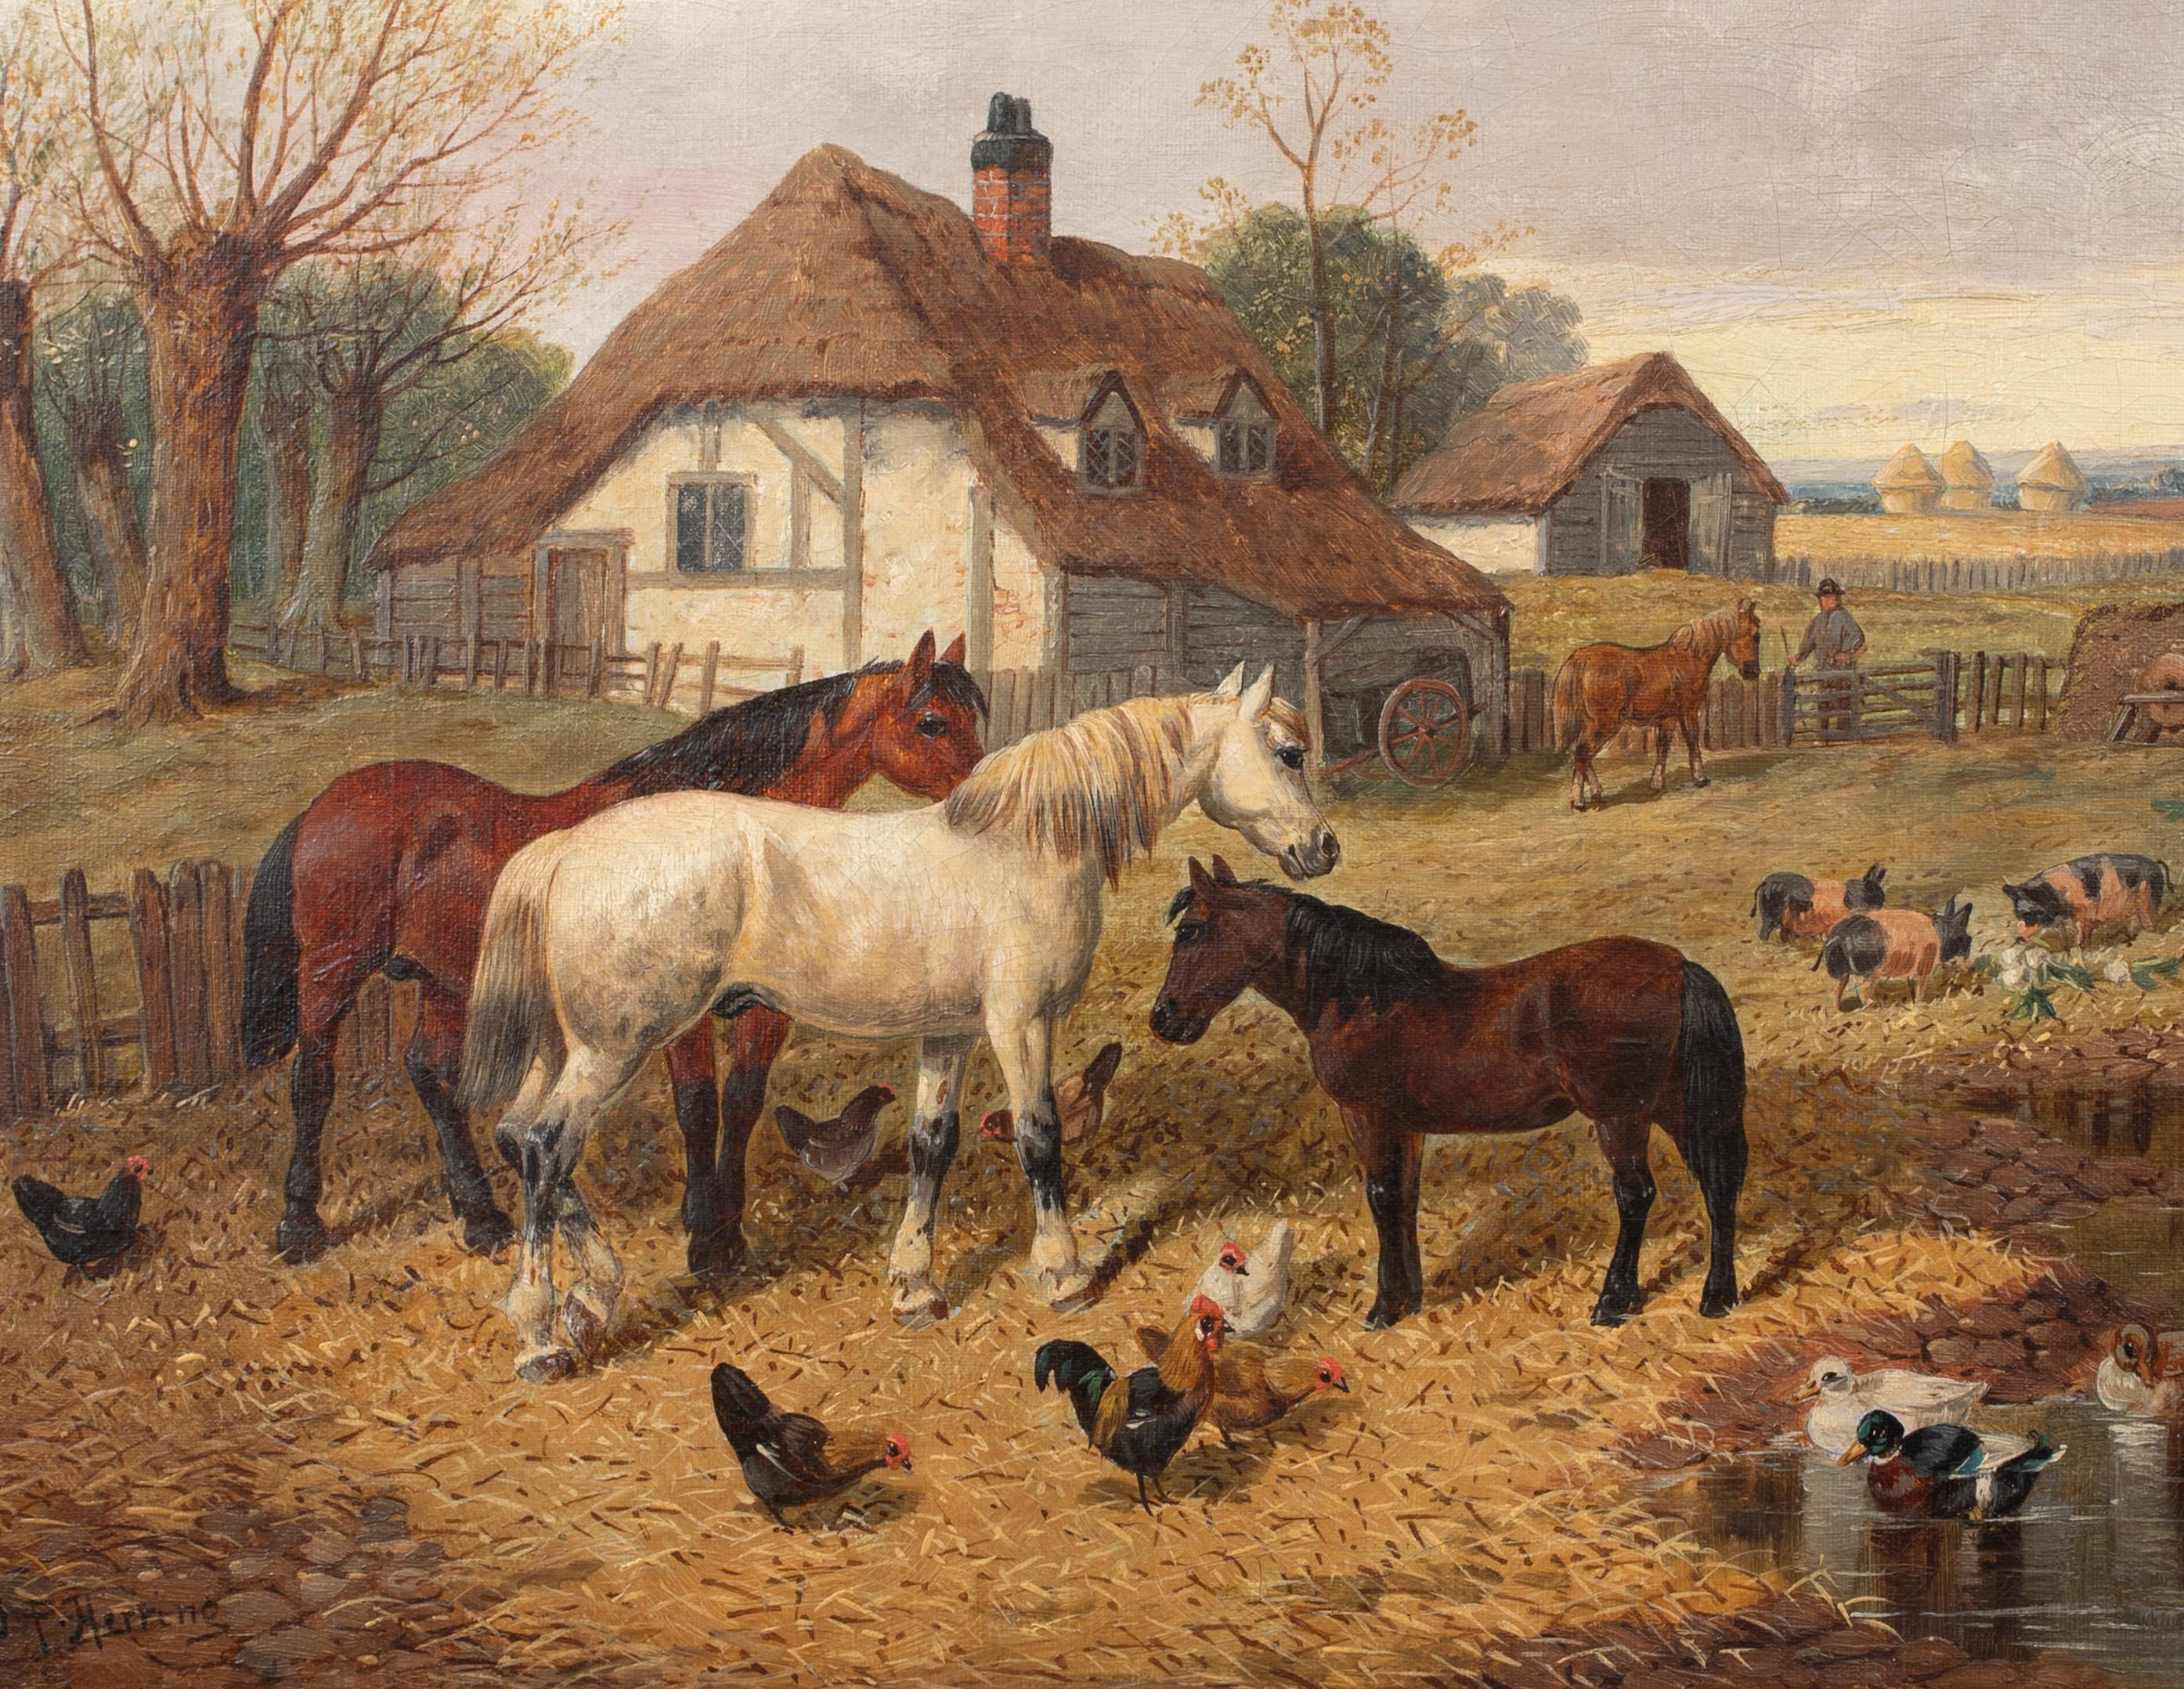 Horses, Chickens & Pigs On The Farm, 17th Century   by John Frederick II HERRING For Sale 2